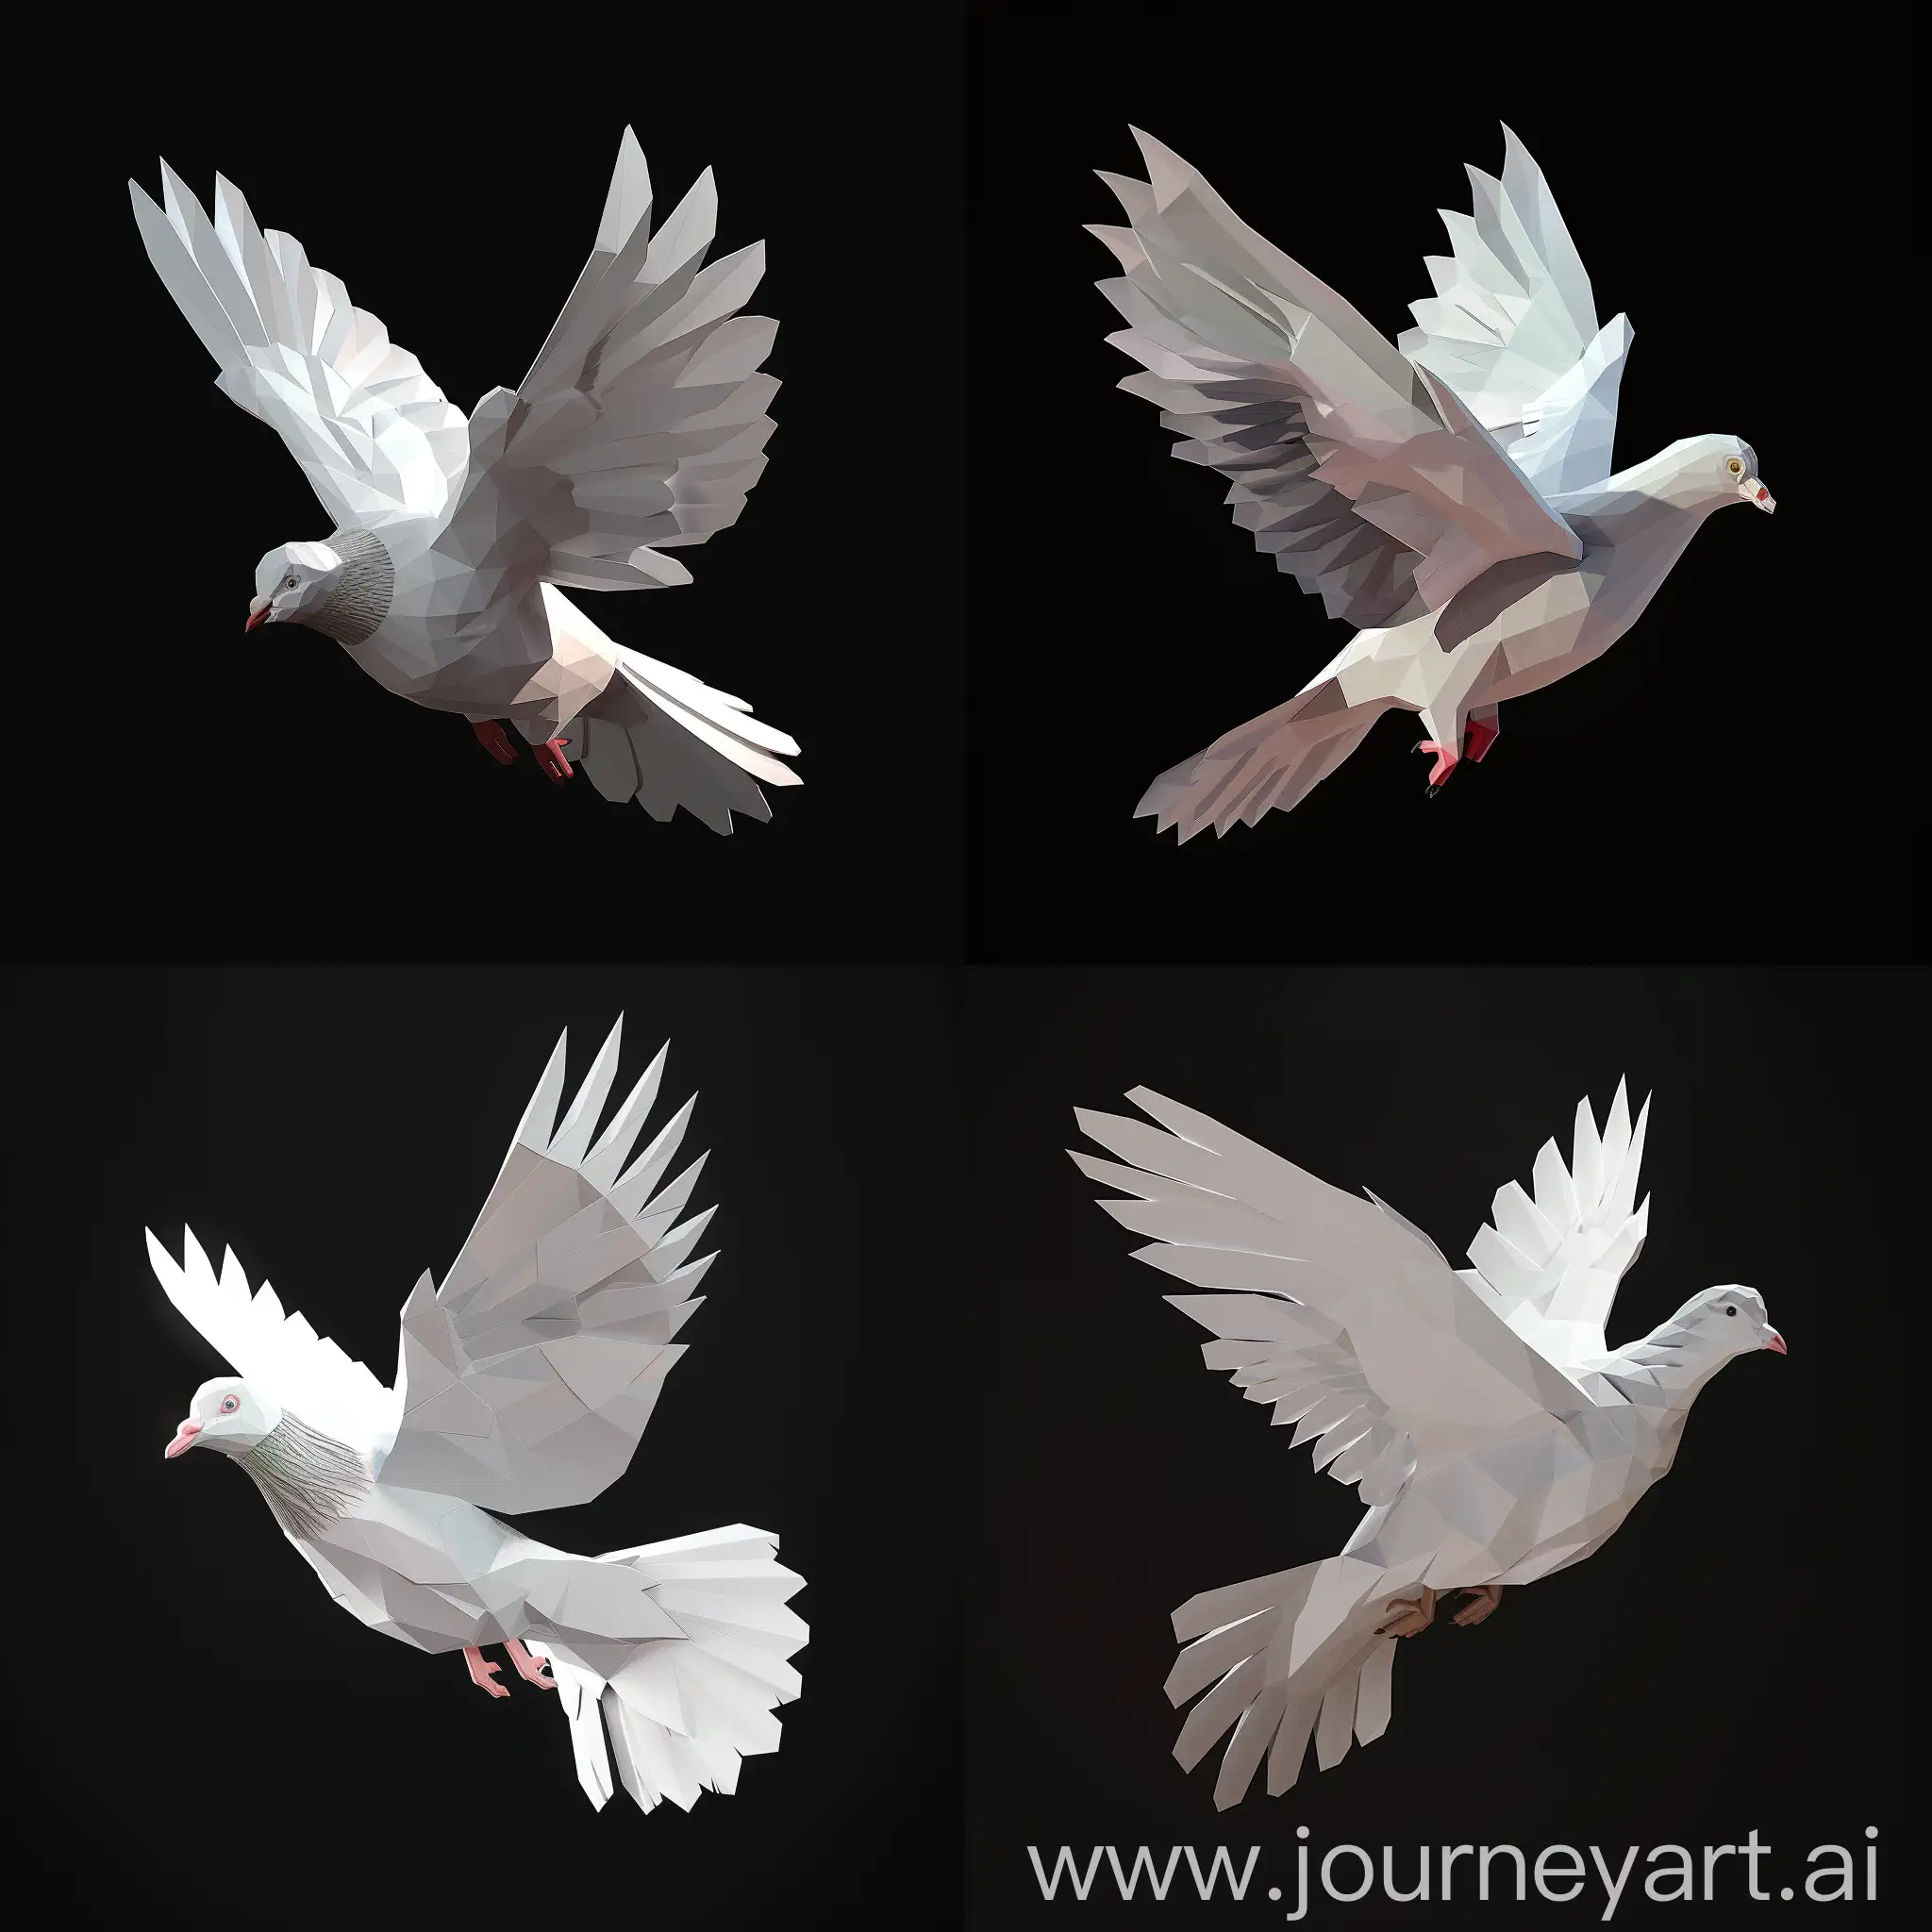 Low-Poly-Flying-White-Pigeon-Bird-3D-Isometric-Render